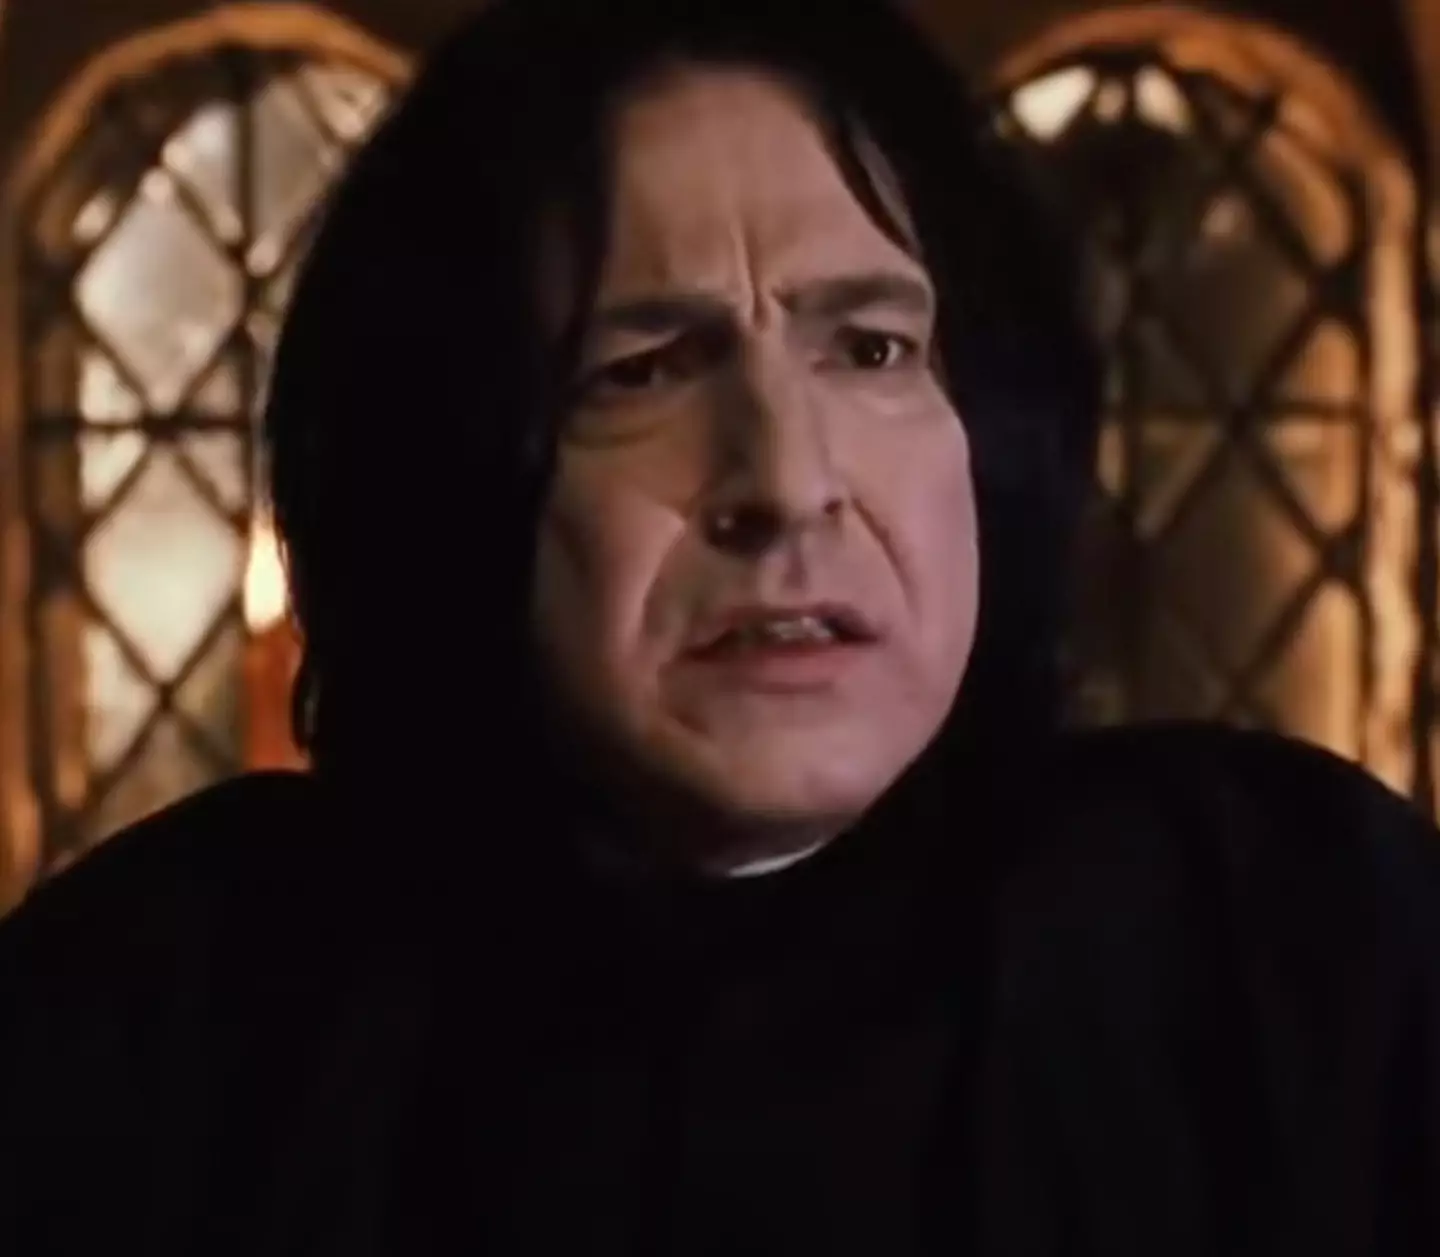 Alan Rickman was the perfect actor to play Snape.